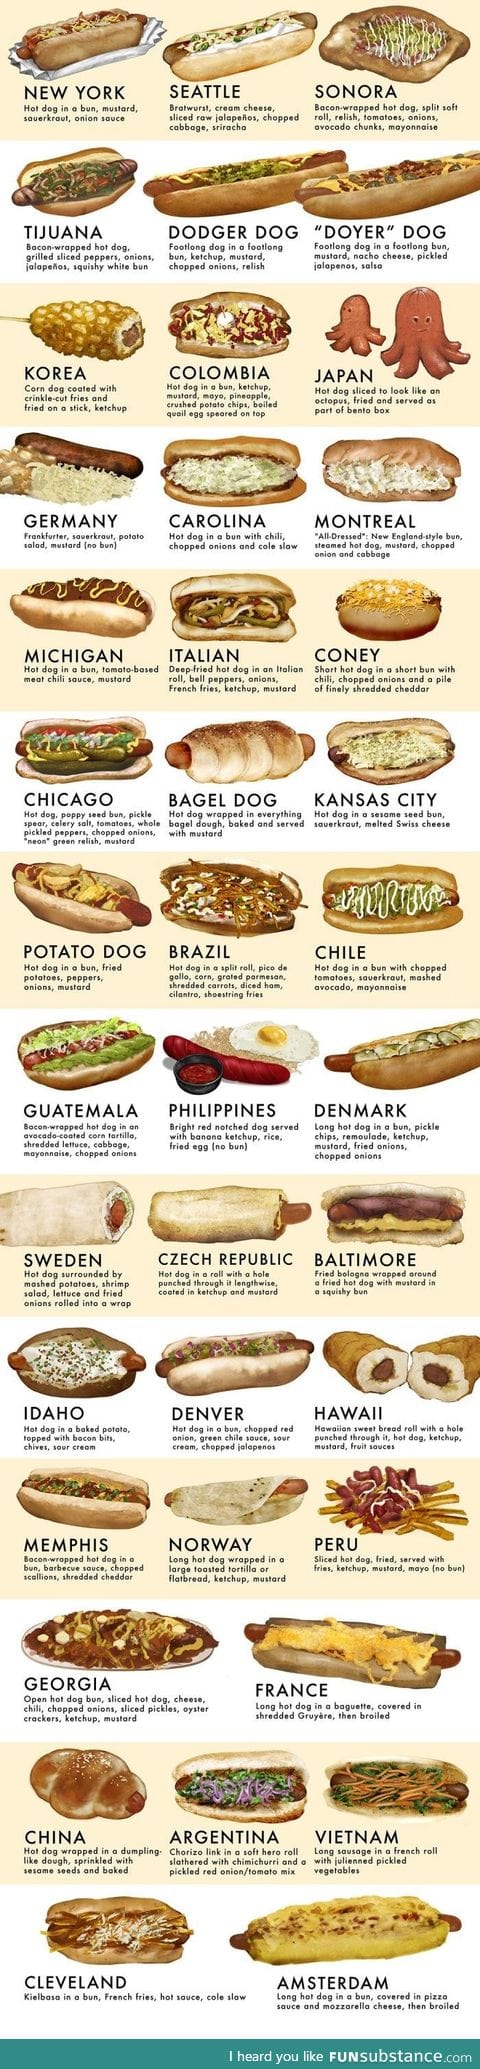 40 ways the world makes awesome hot dogs